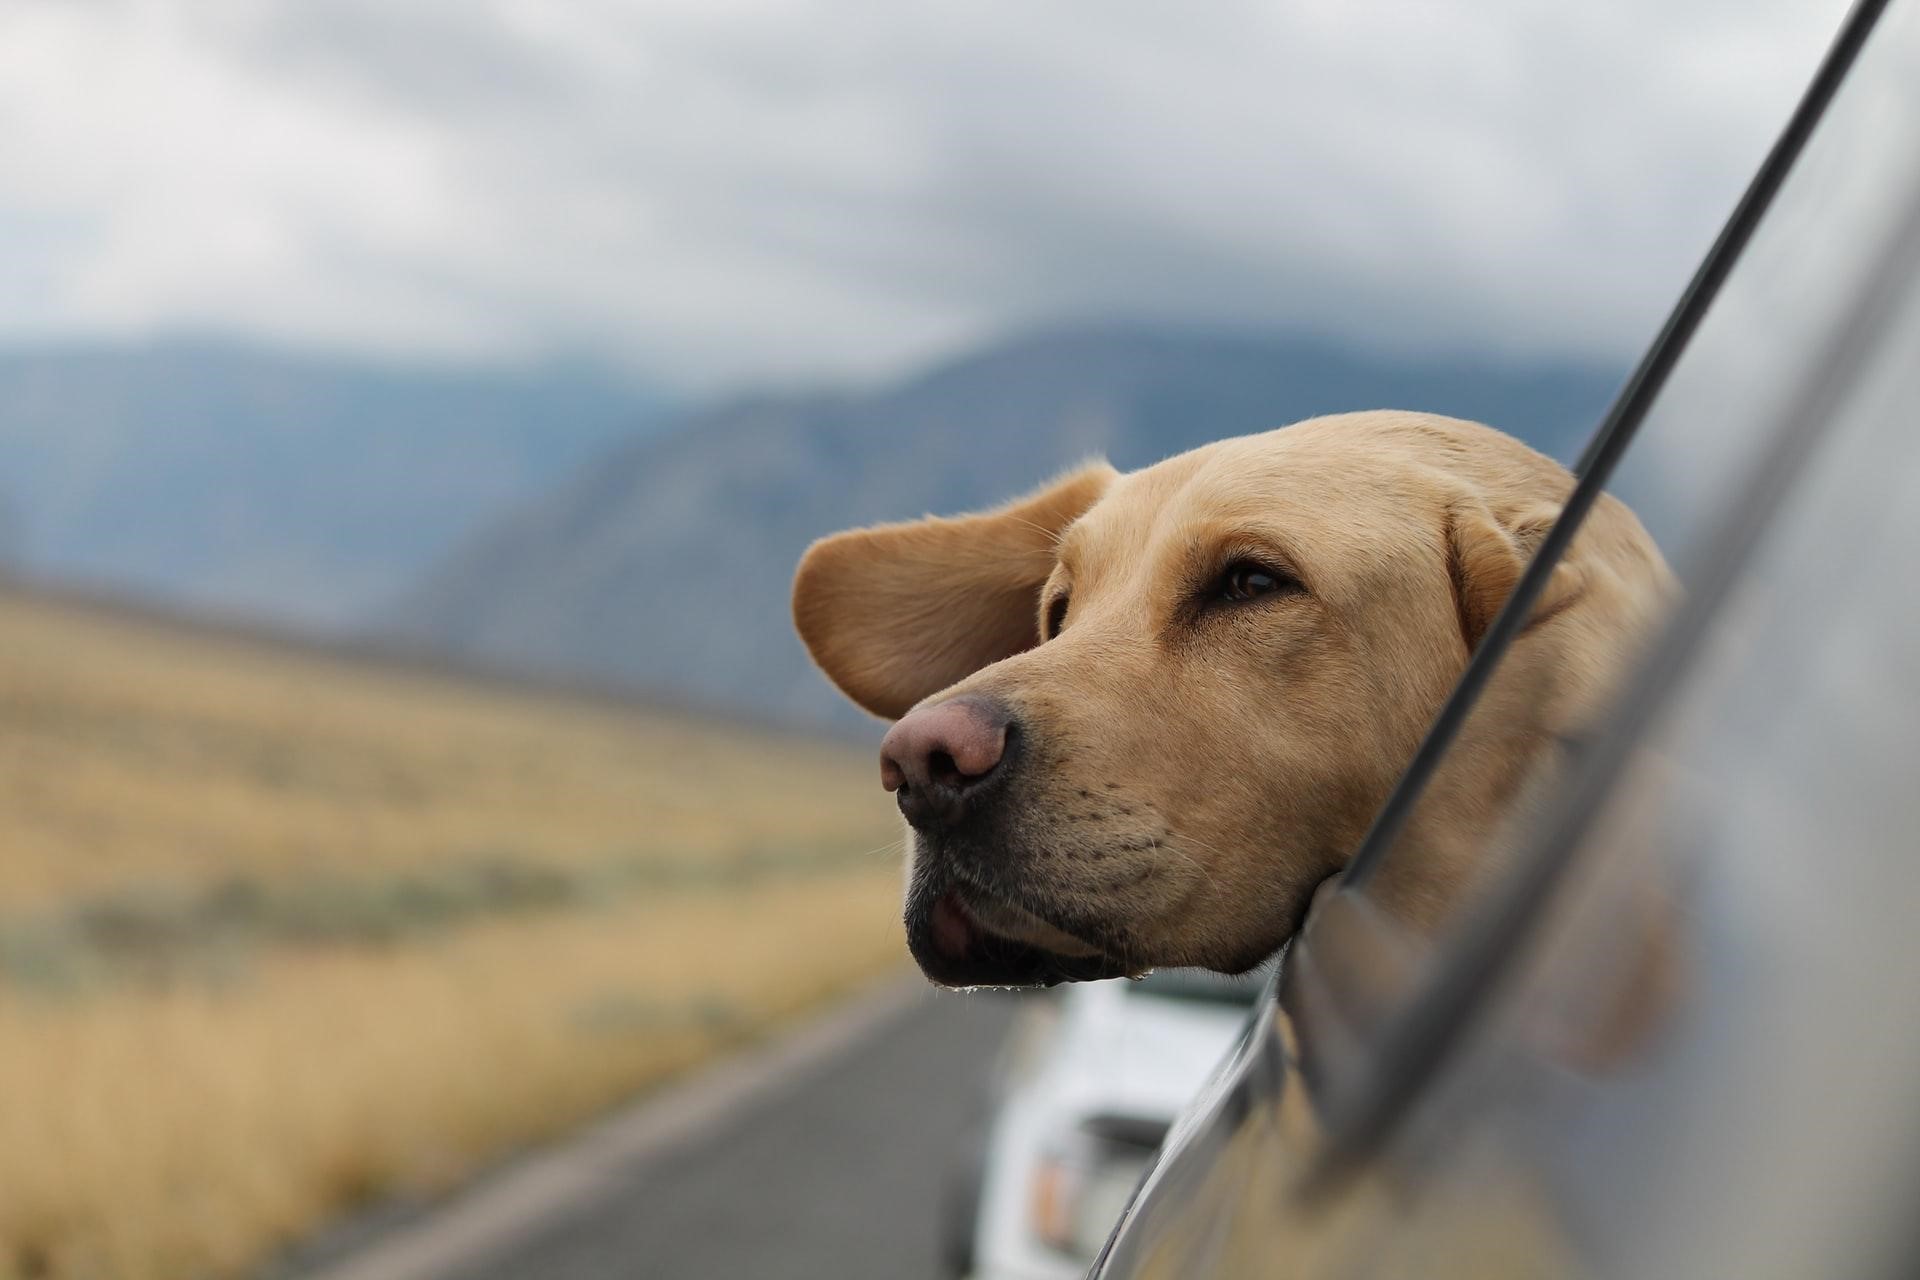 Top 6 tips to travel safely with your pet